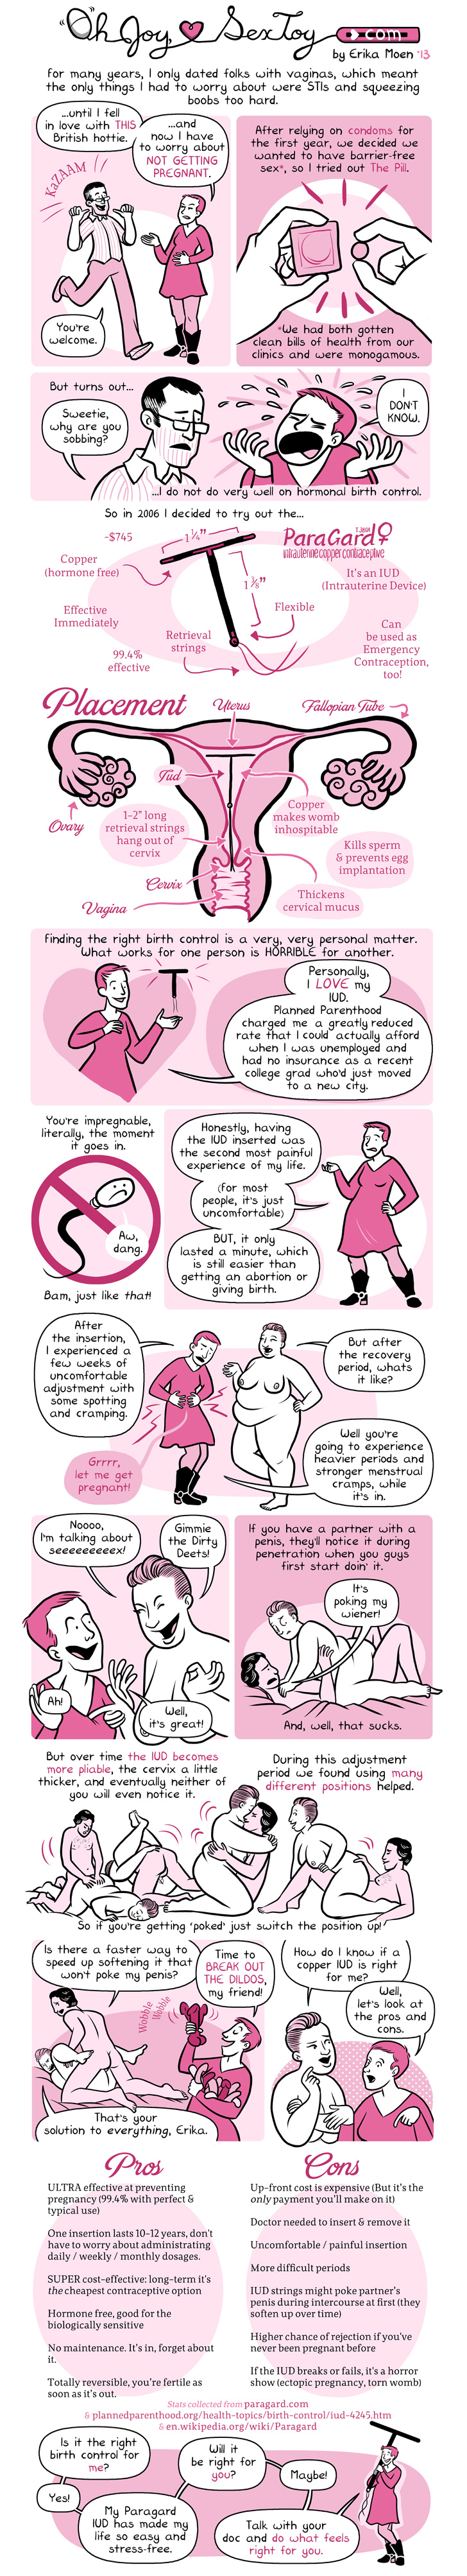 A comic by Erika Moen about getting a copper IUD